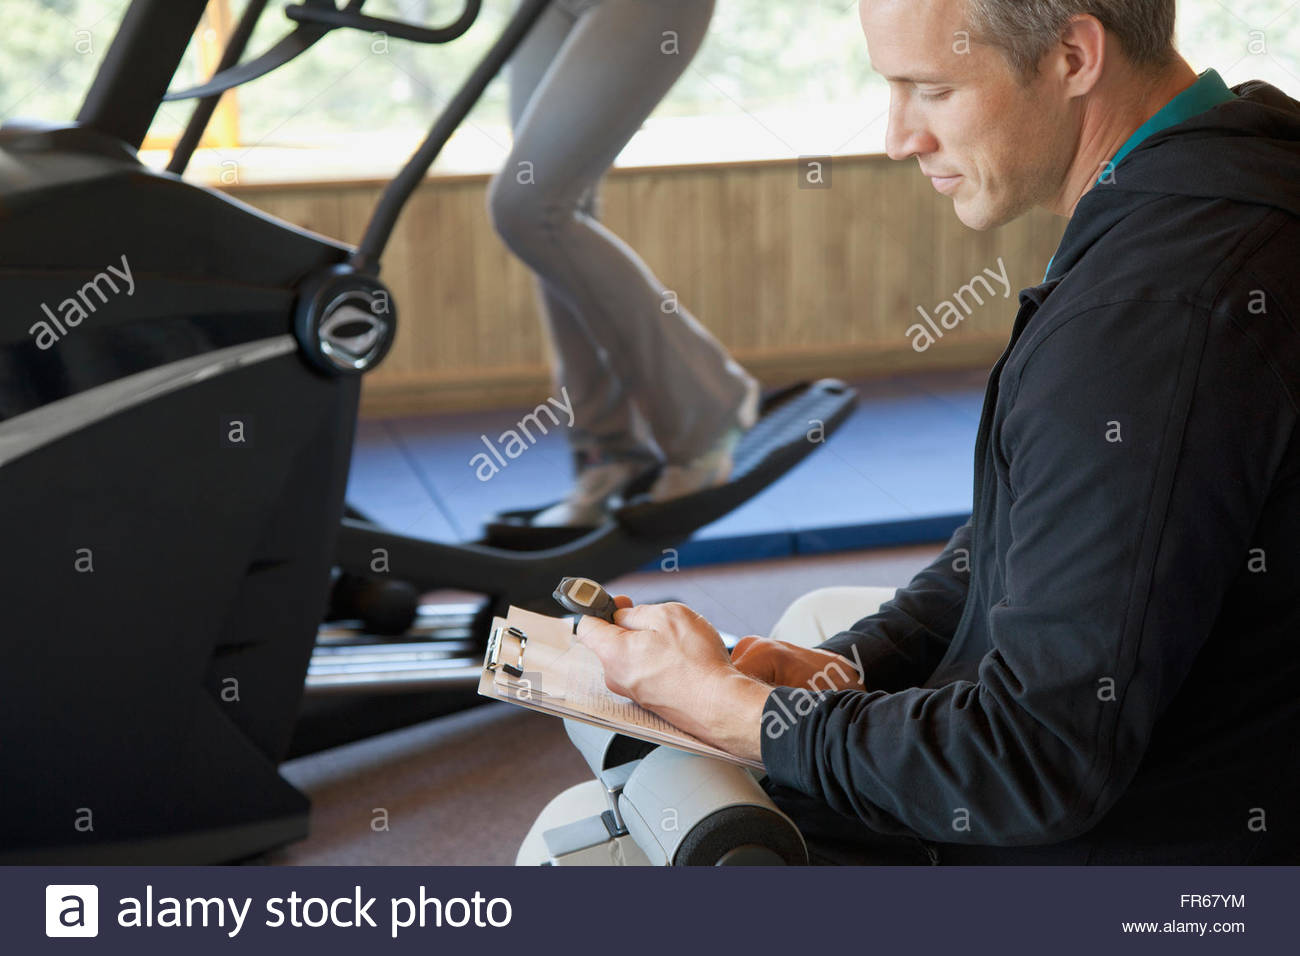 personal trainer timing woman on fitness machine Stock Photo